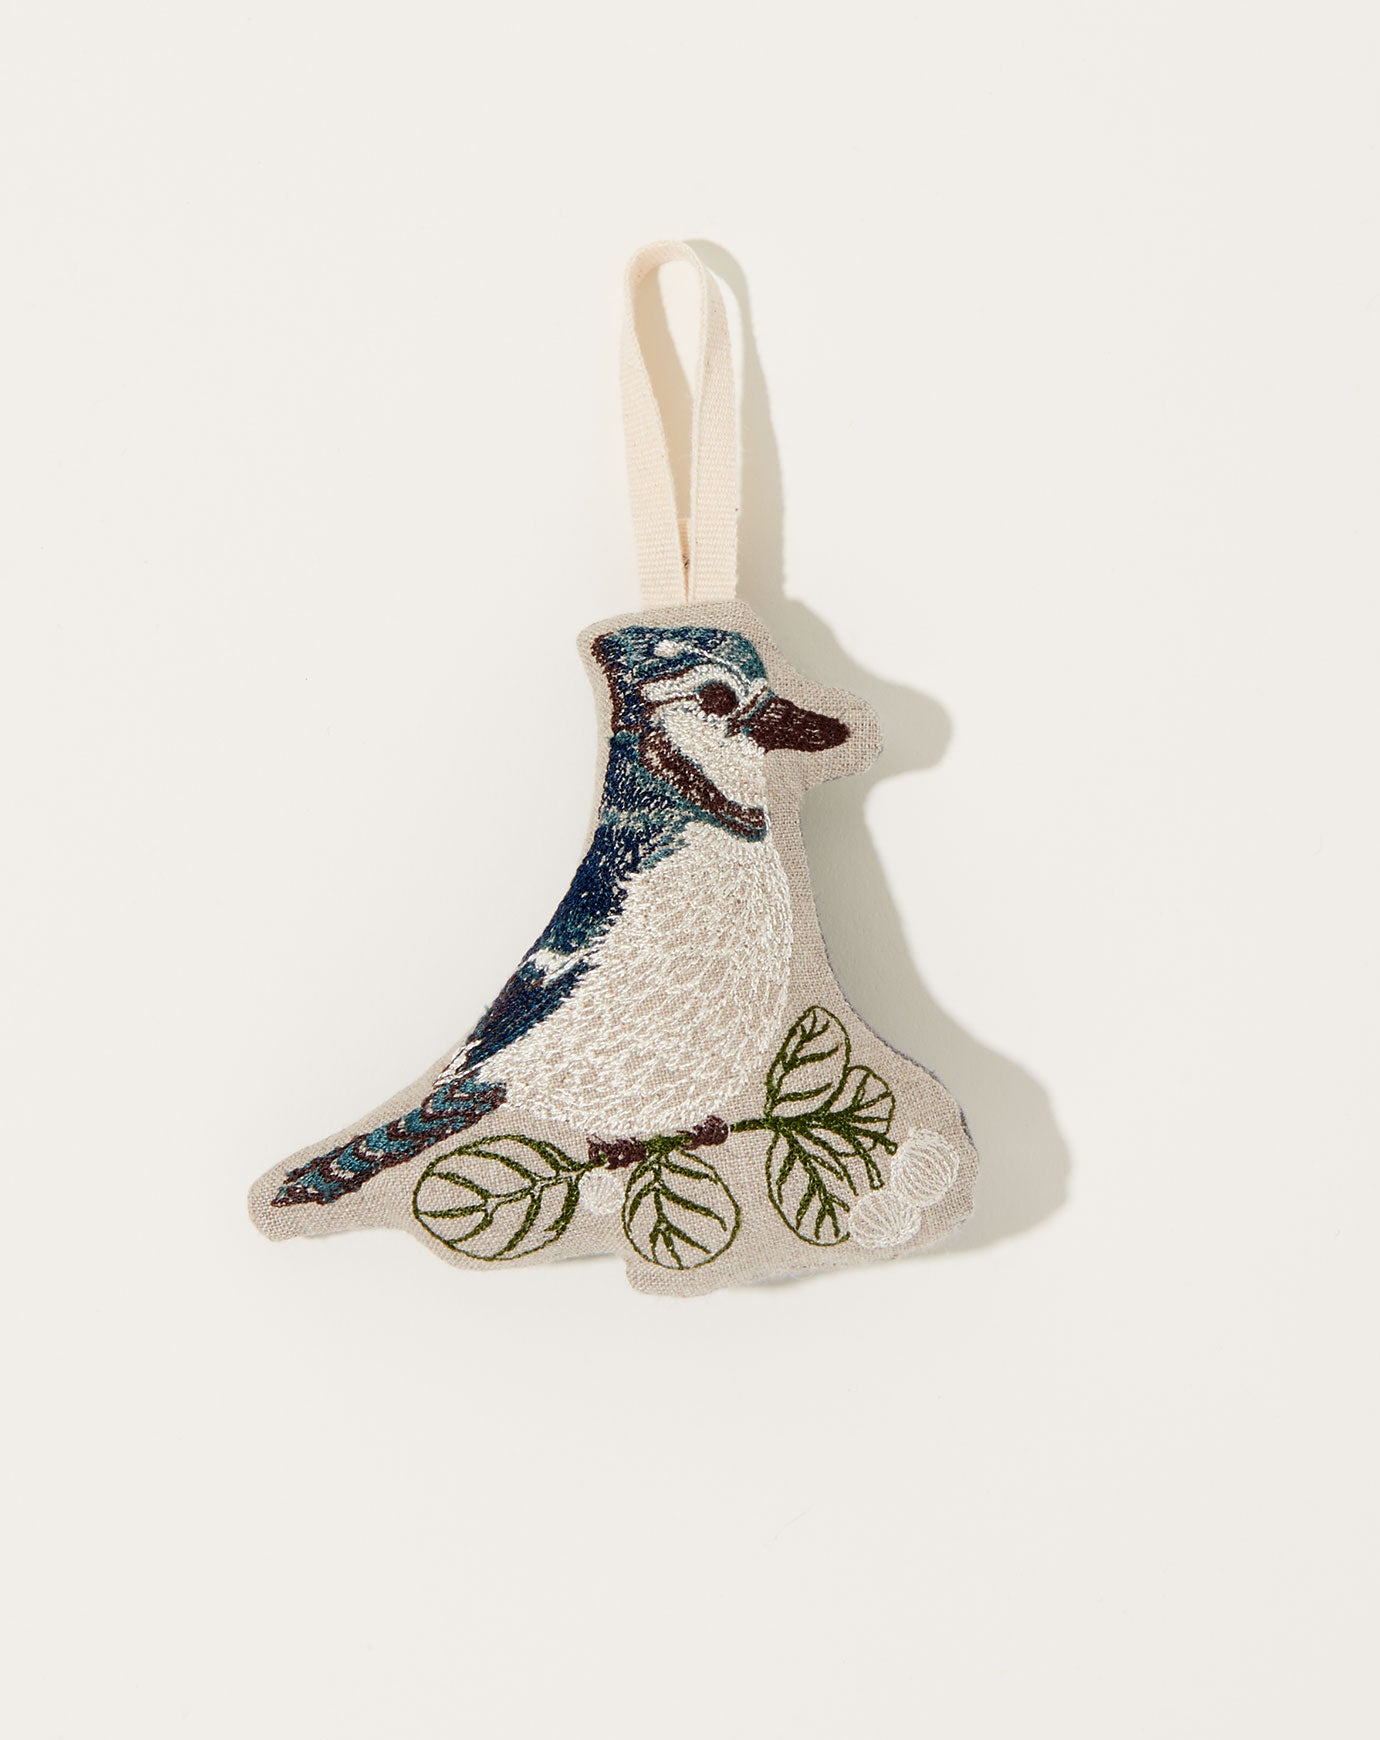 Coral & Tusk Blue Jay Ornament